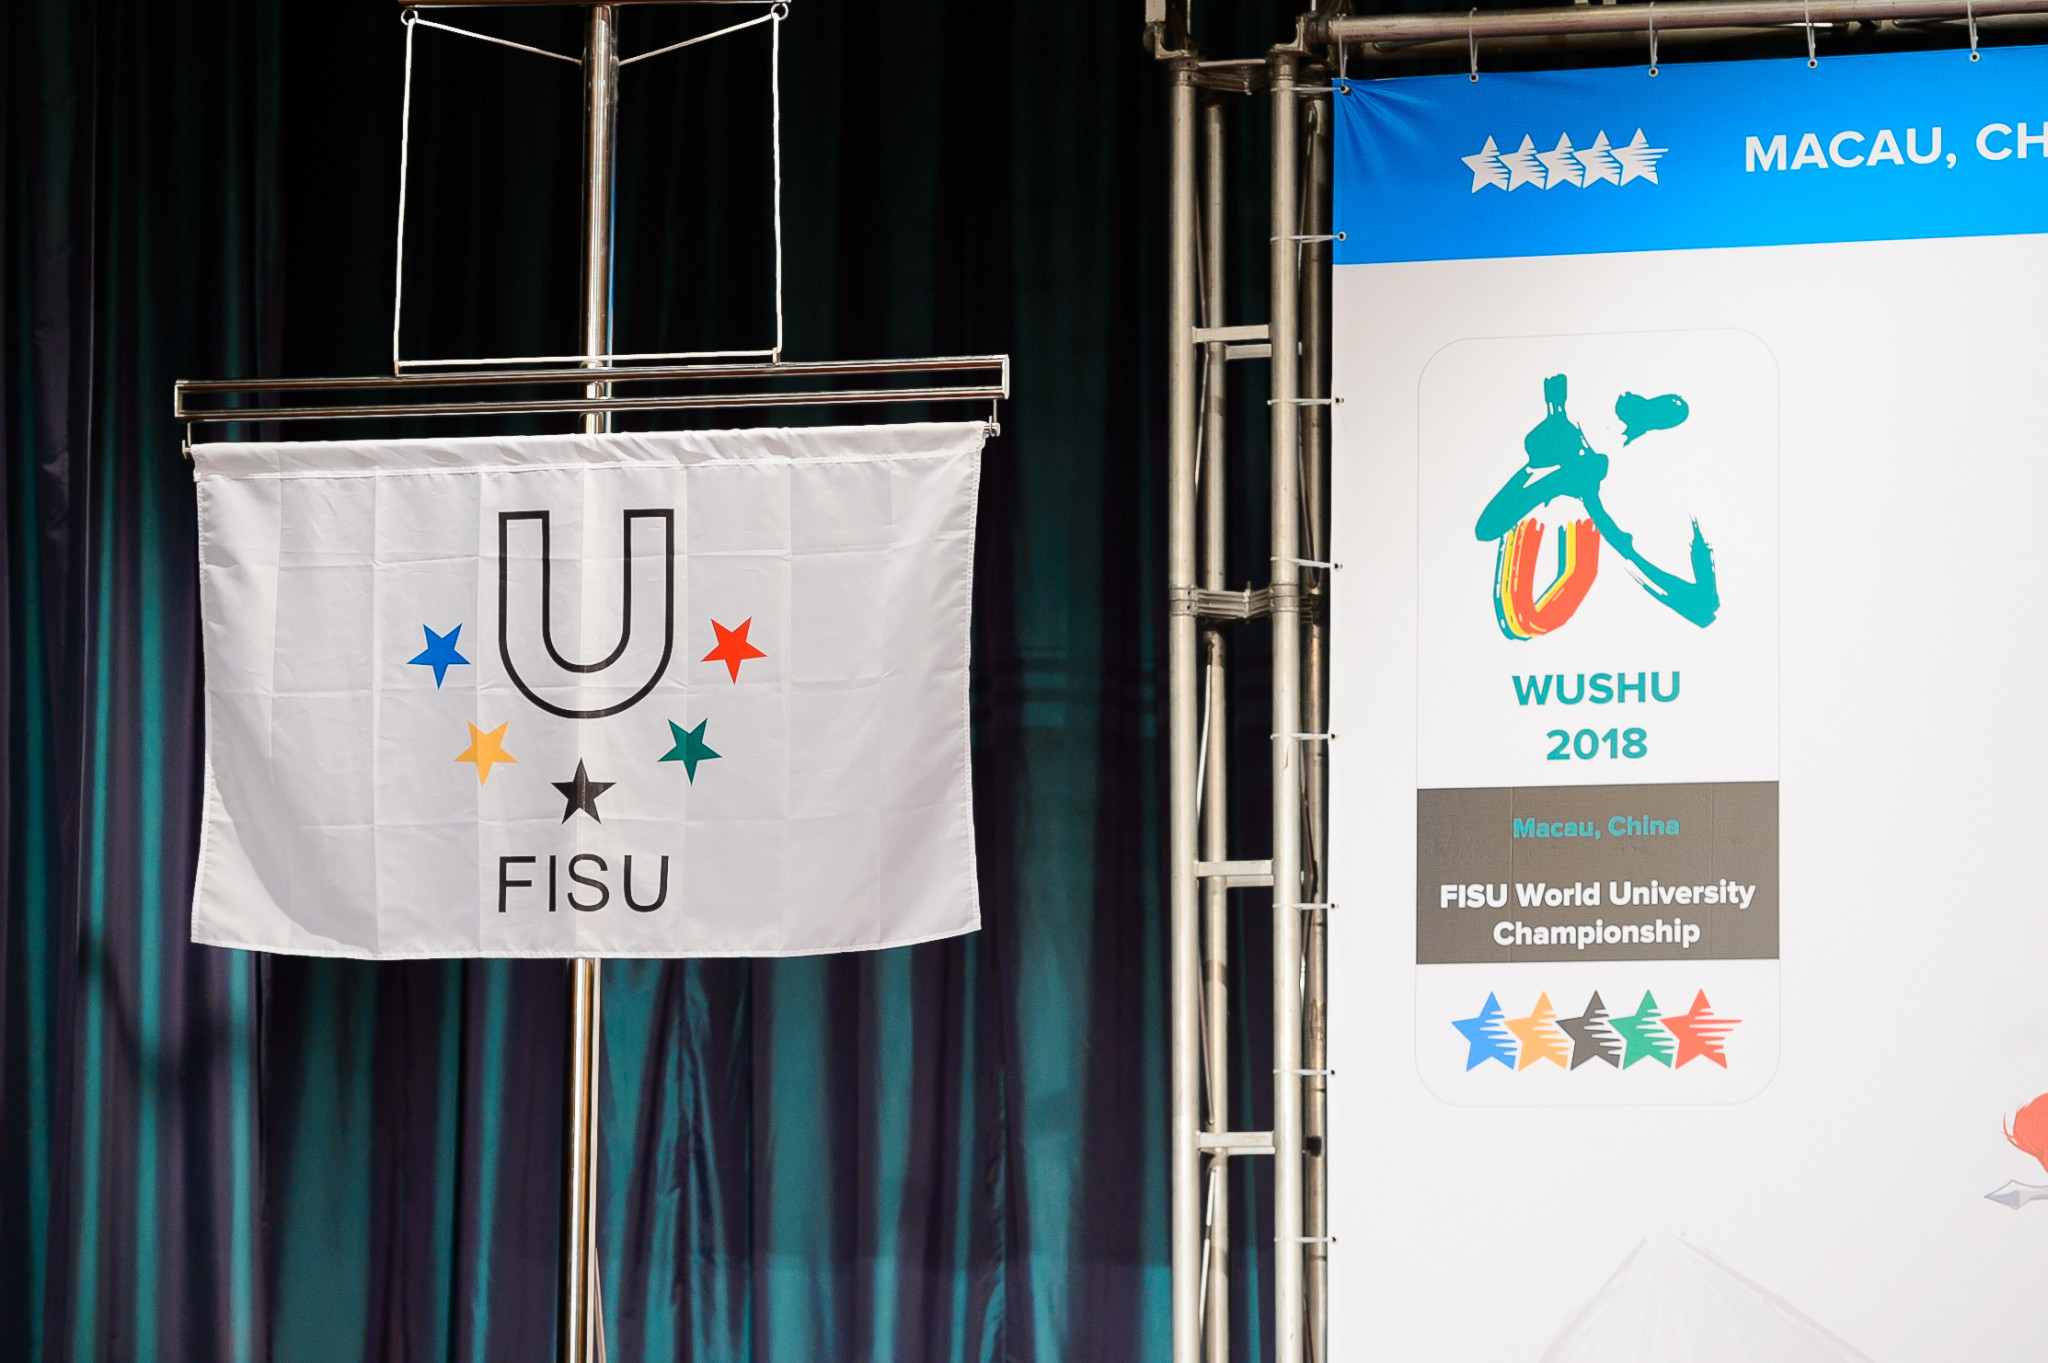 The event is the first-ever World University Championship in wushu ©WUC Wushu
